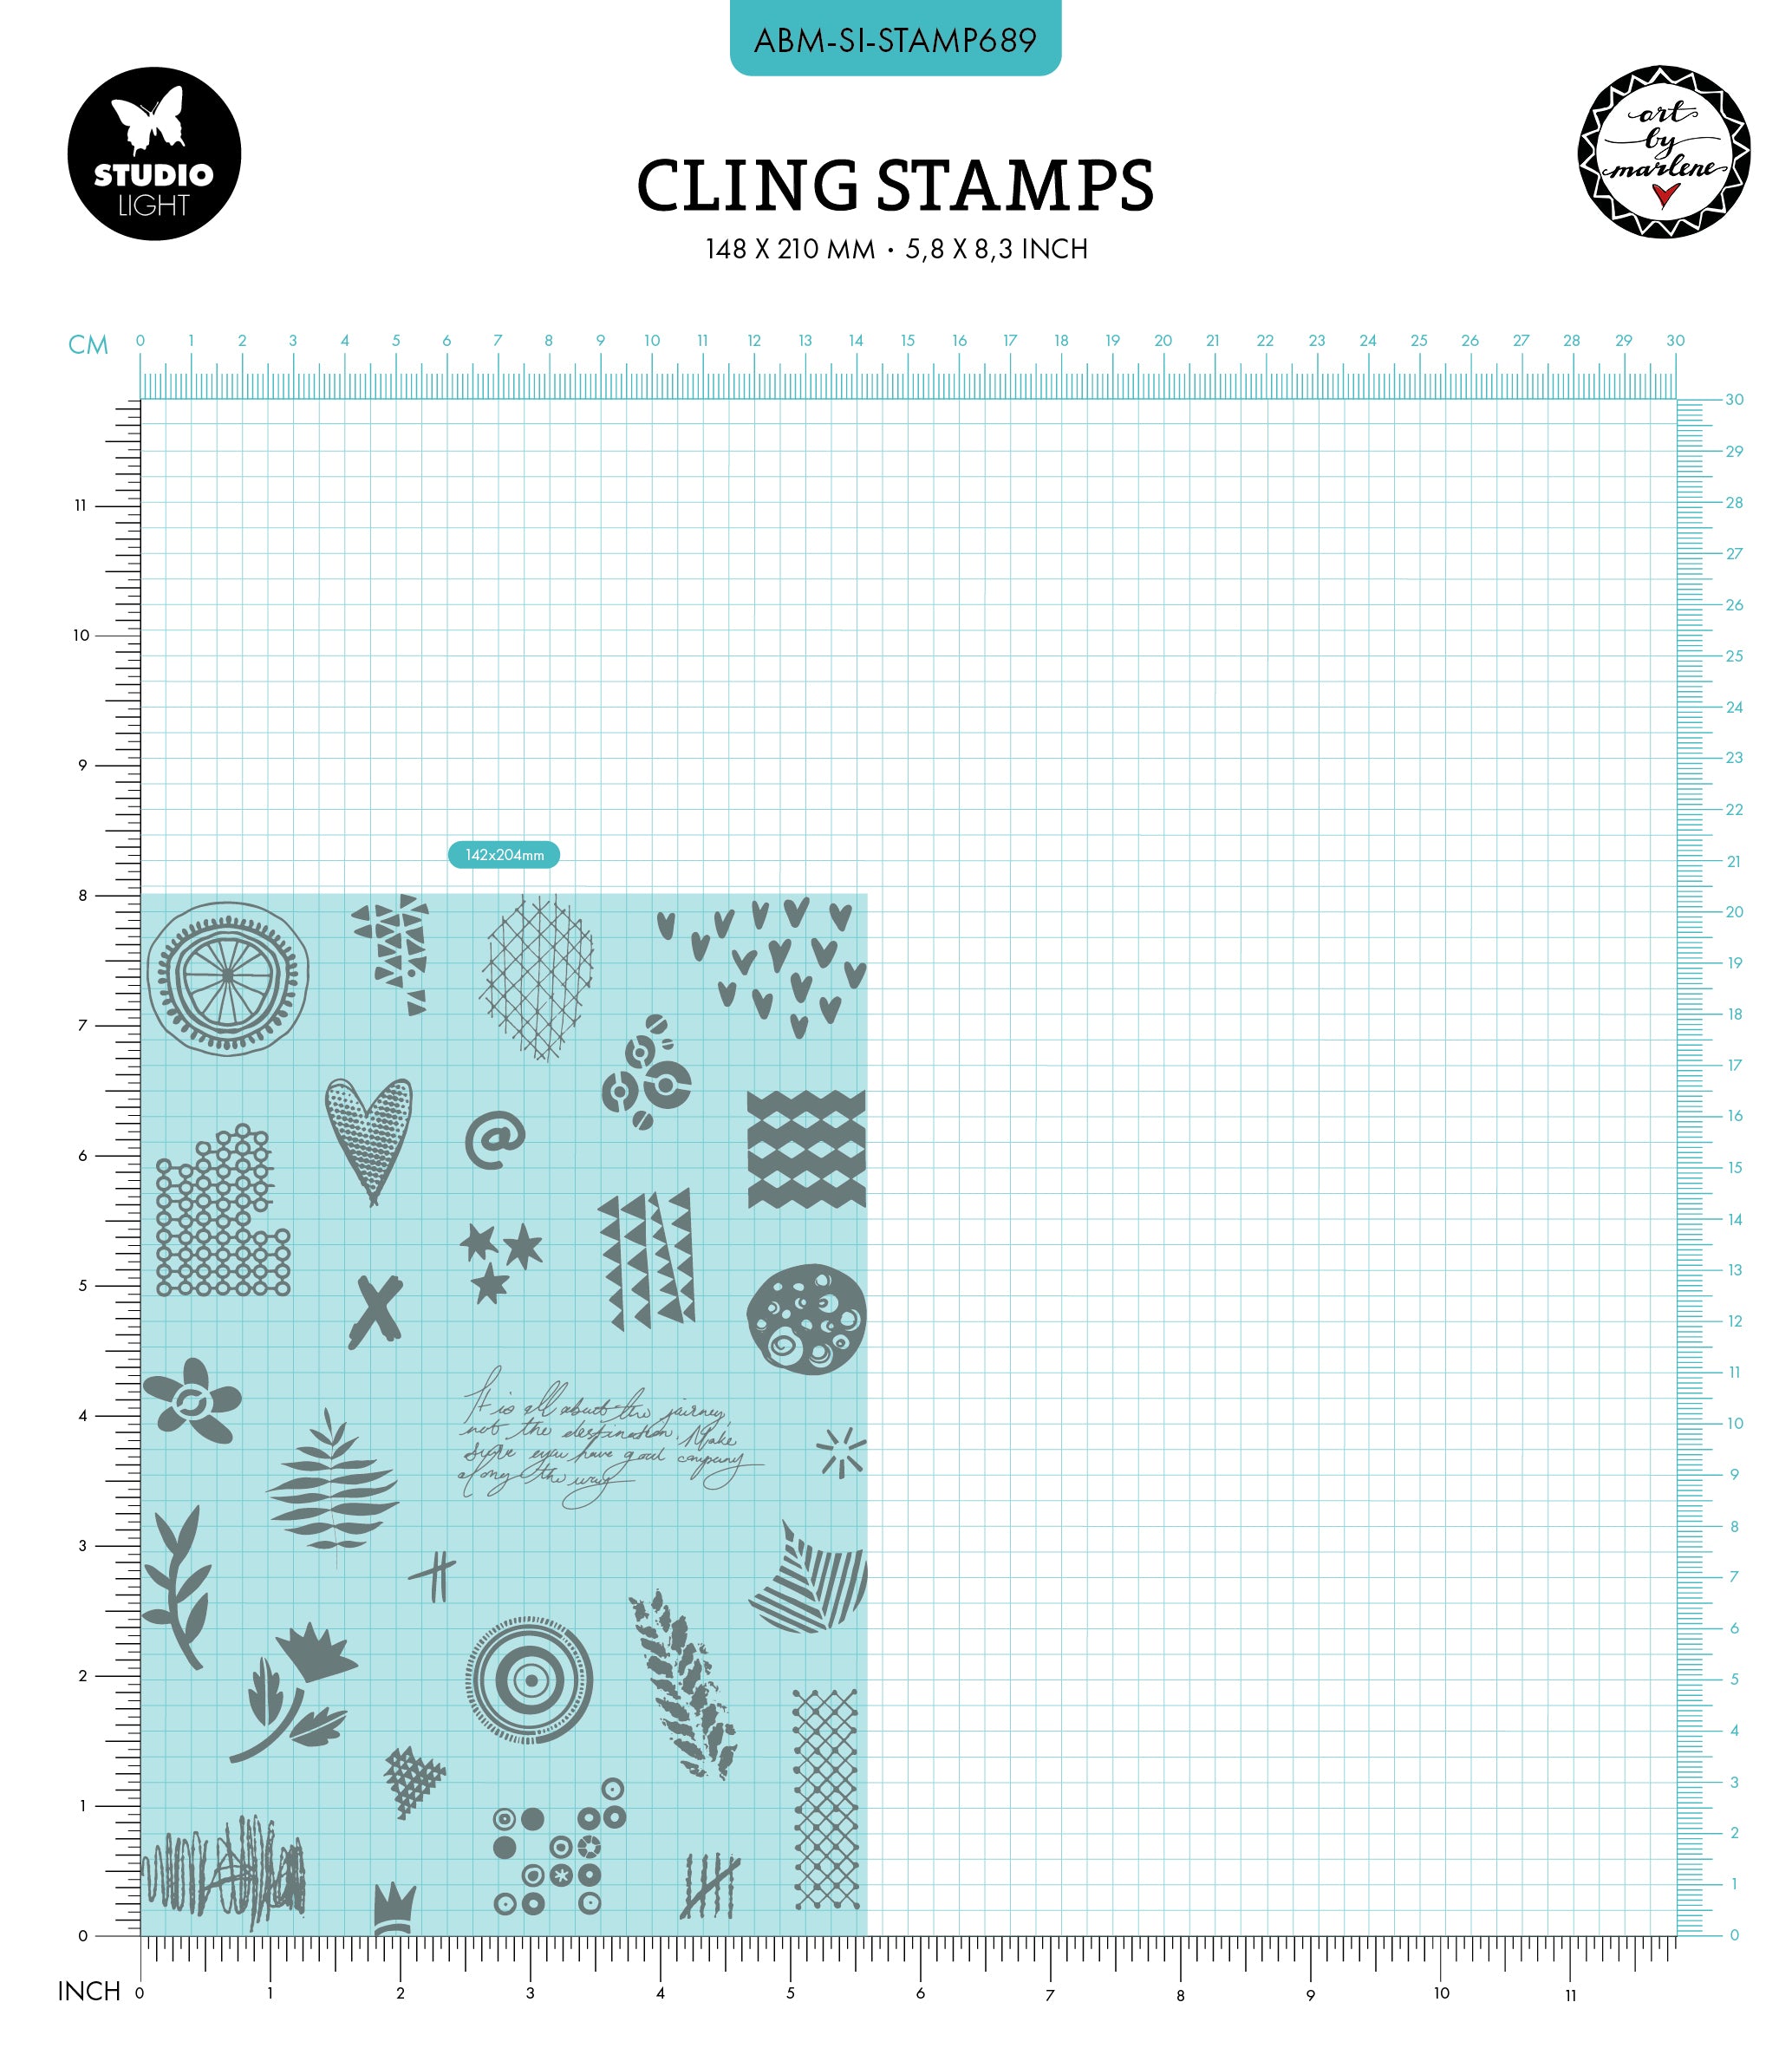 ABM Cling Stamp Journaling Deco Signature Collection 29 PC